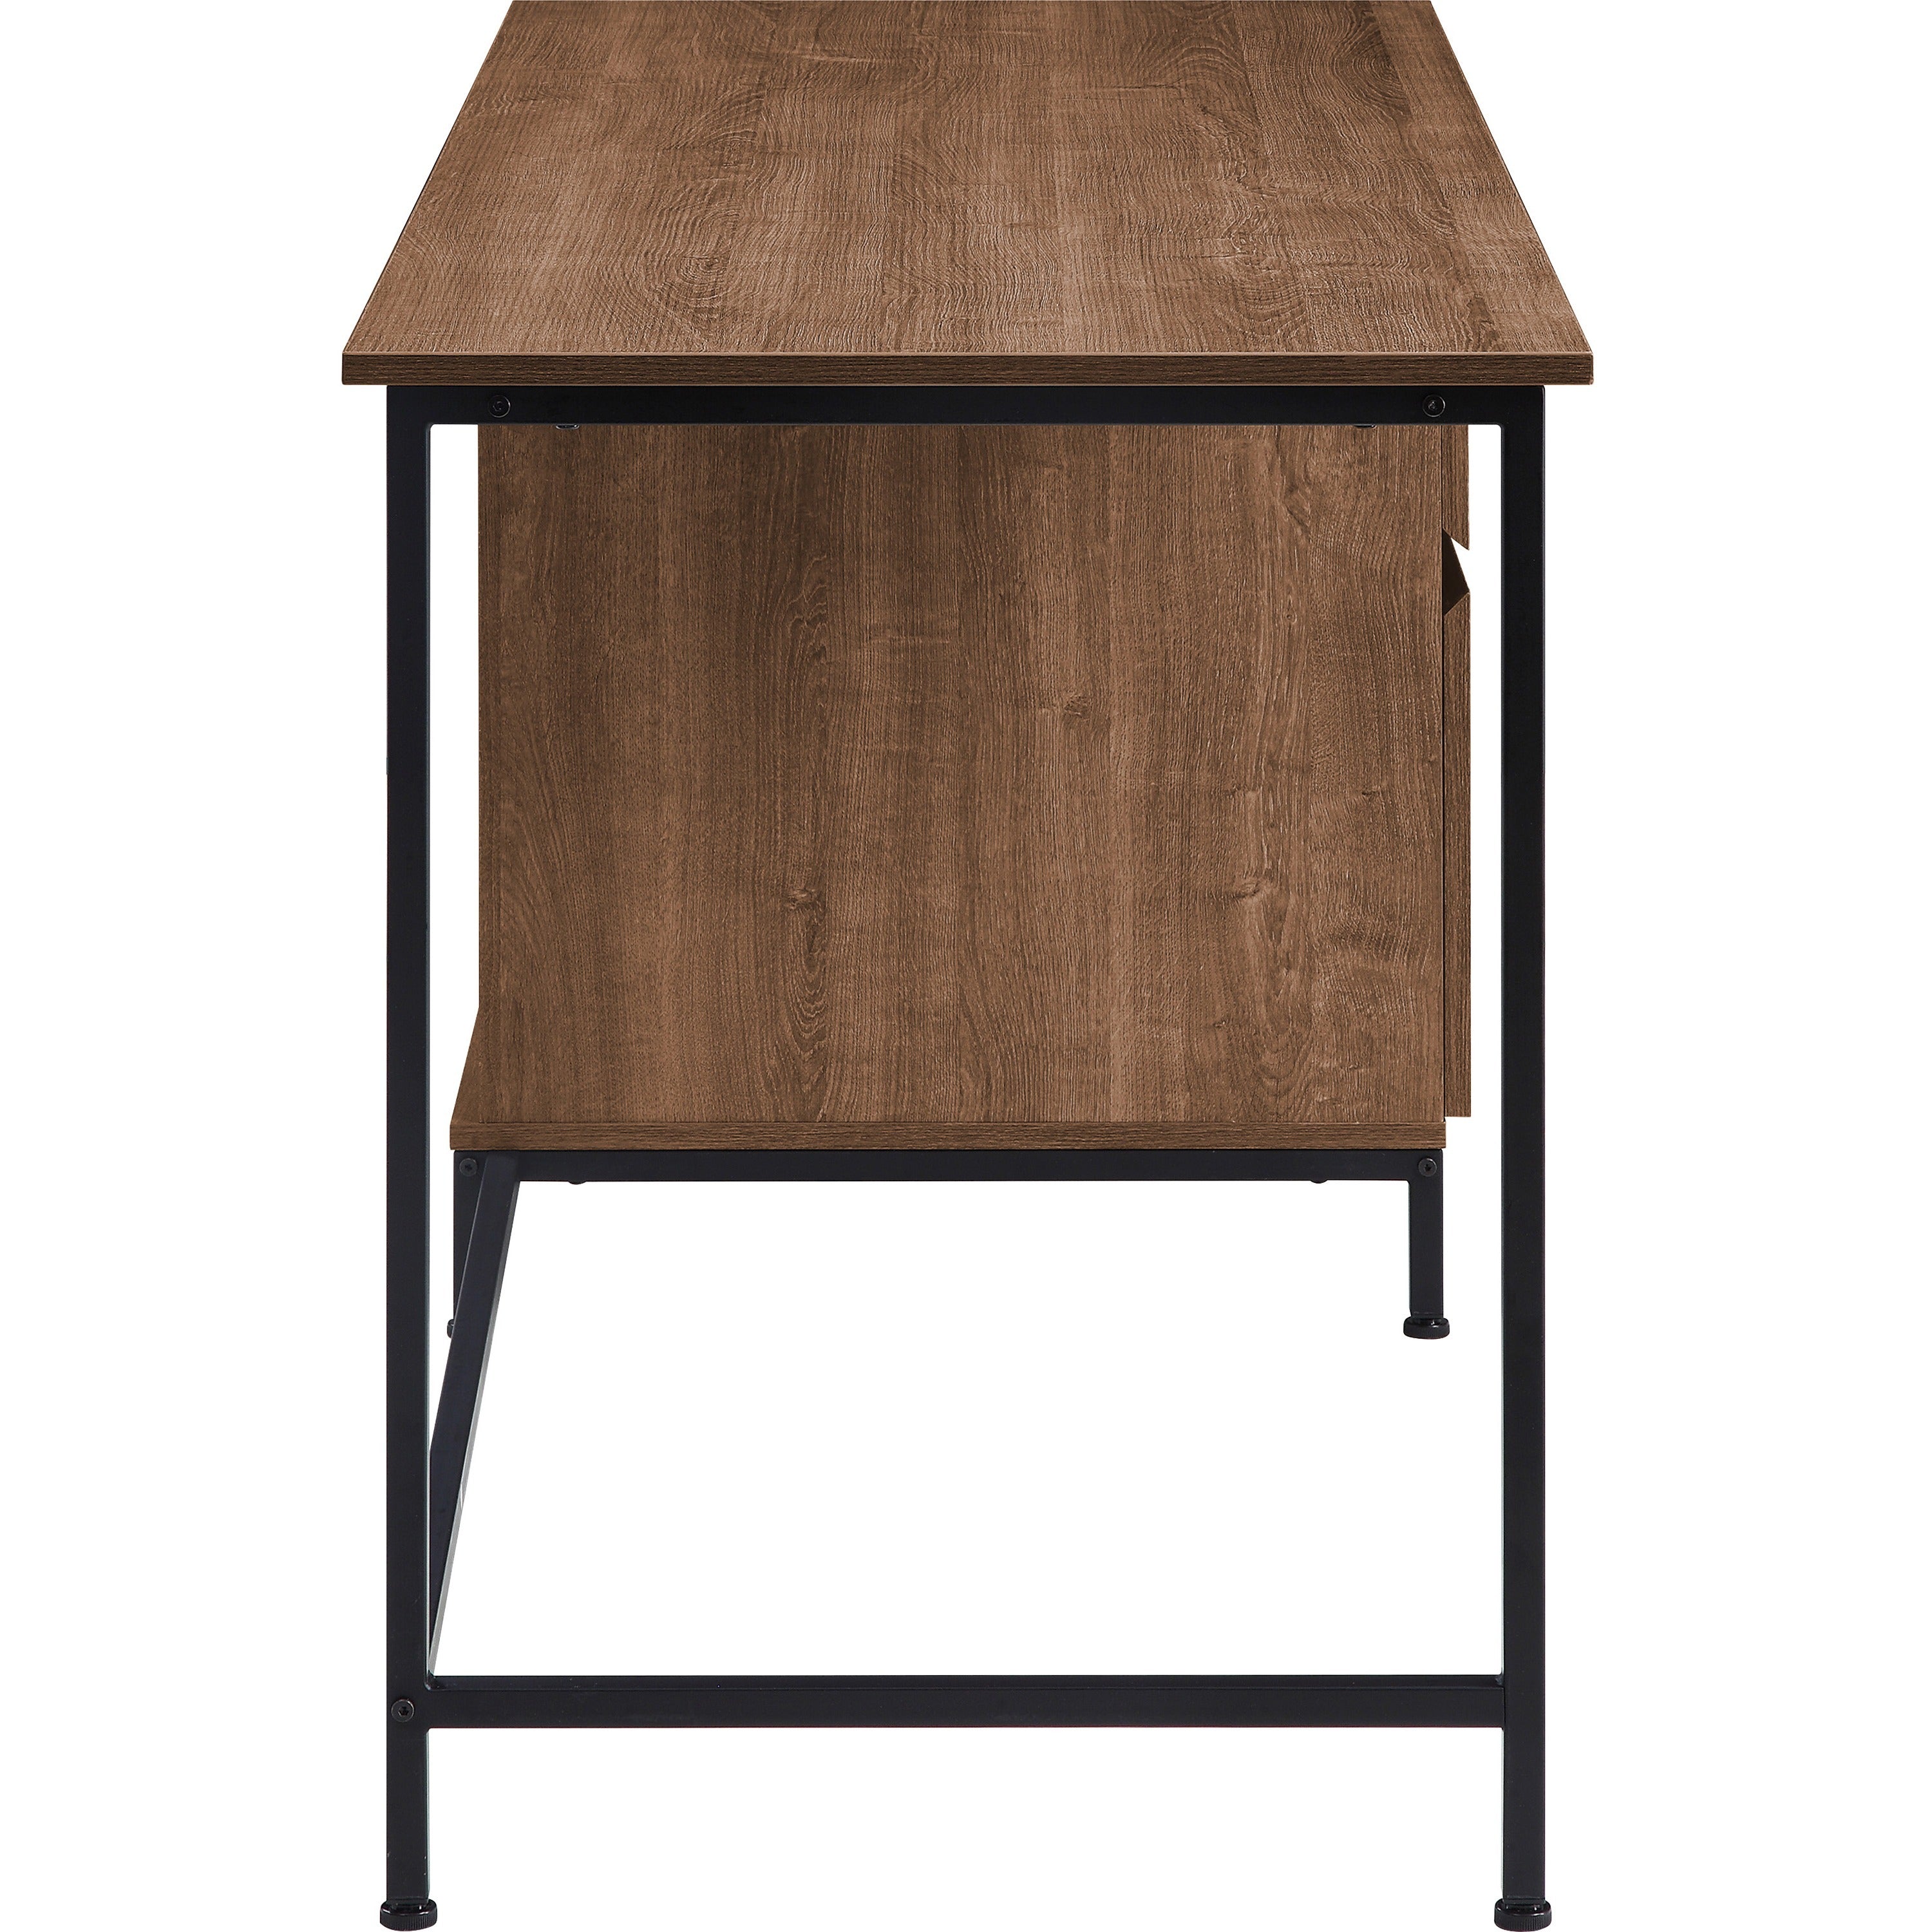 lorell-soho-desk-with-side-drawers-55-x-23630-3-x-file-drawers-single-pedestal-on-right-side-finish-walnut_llr97615 - 3